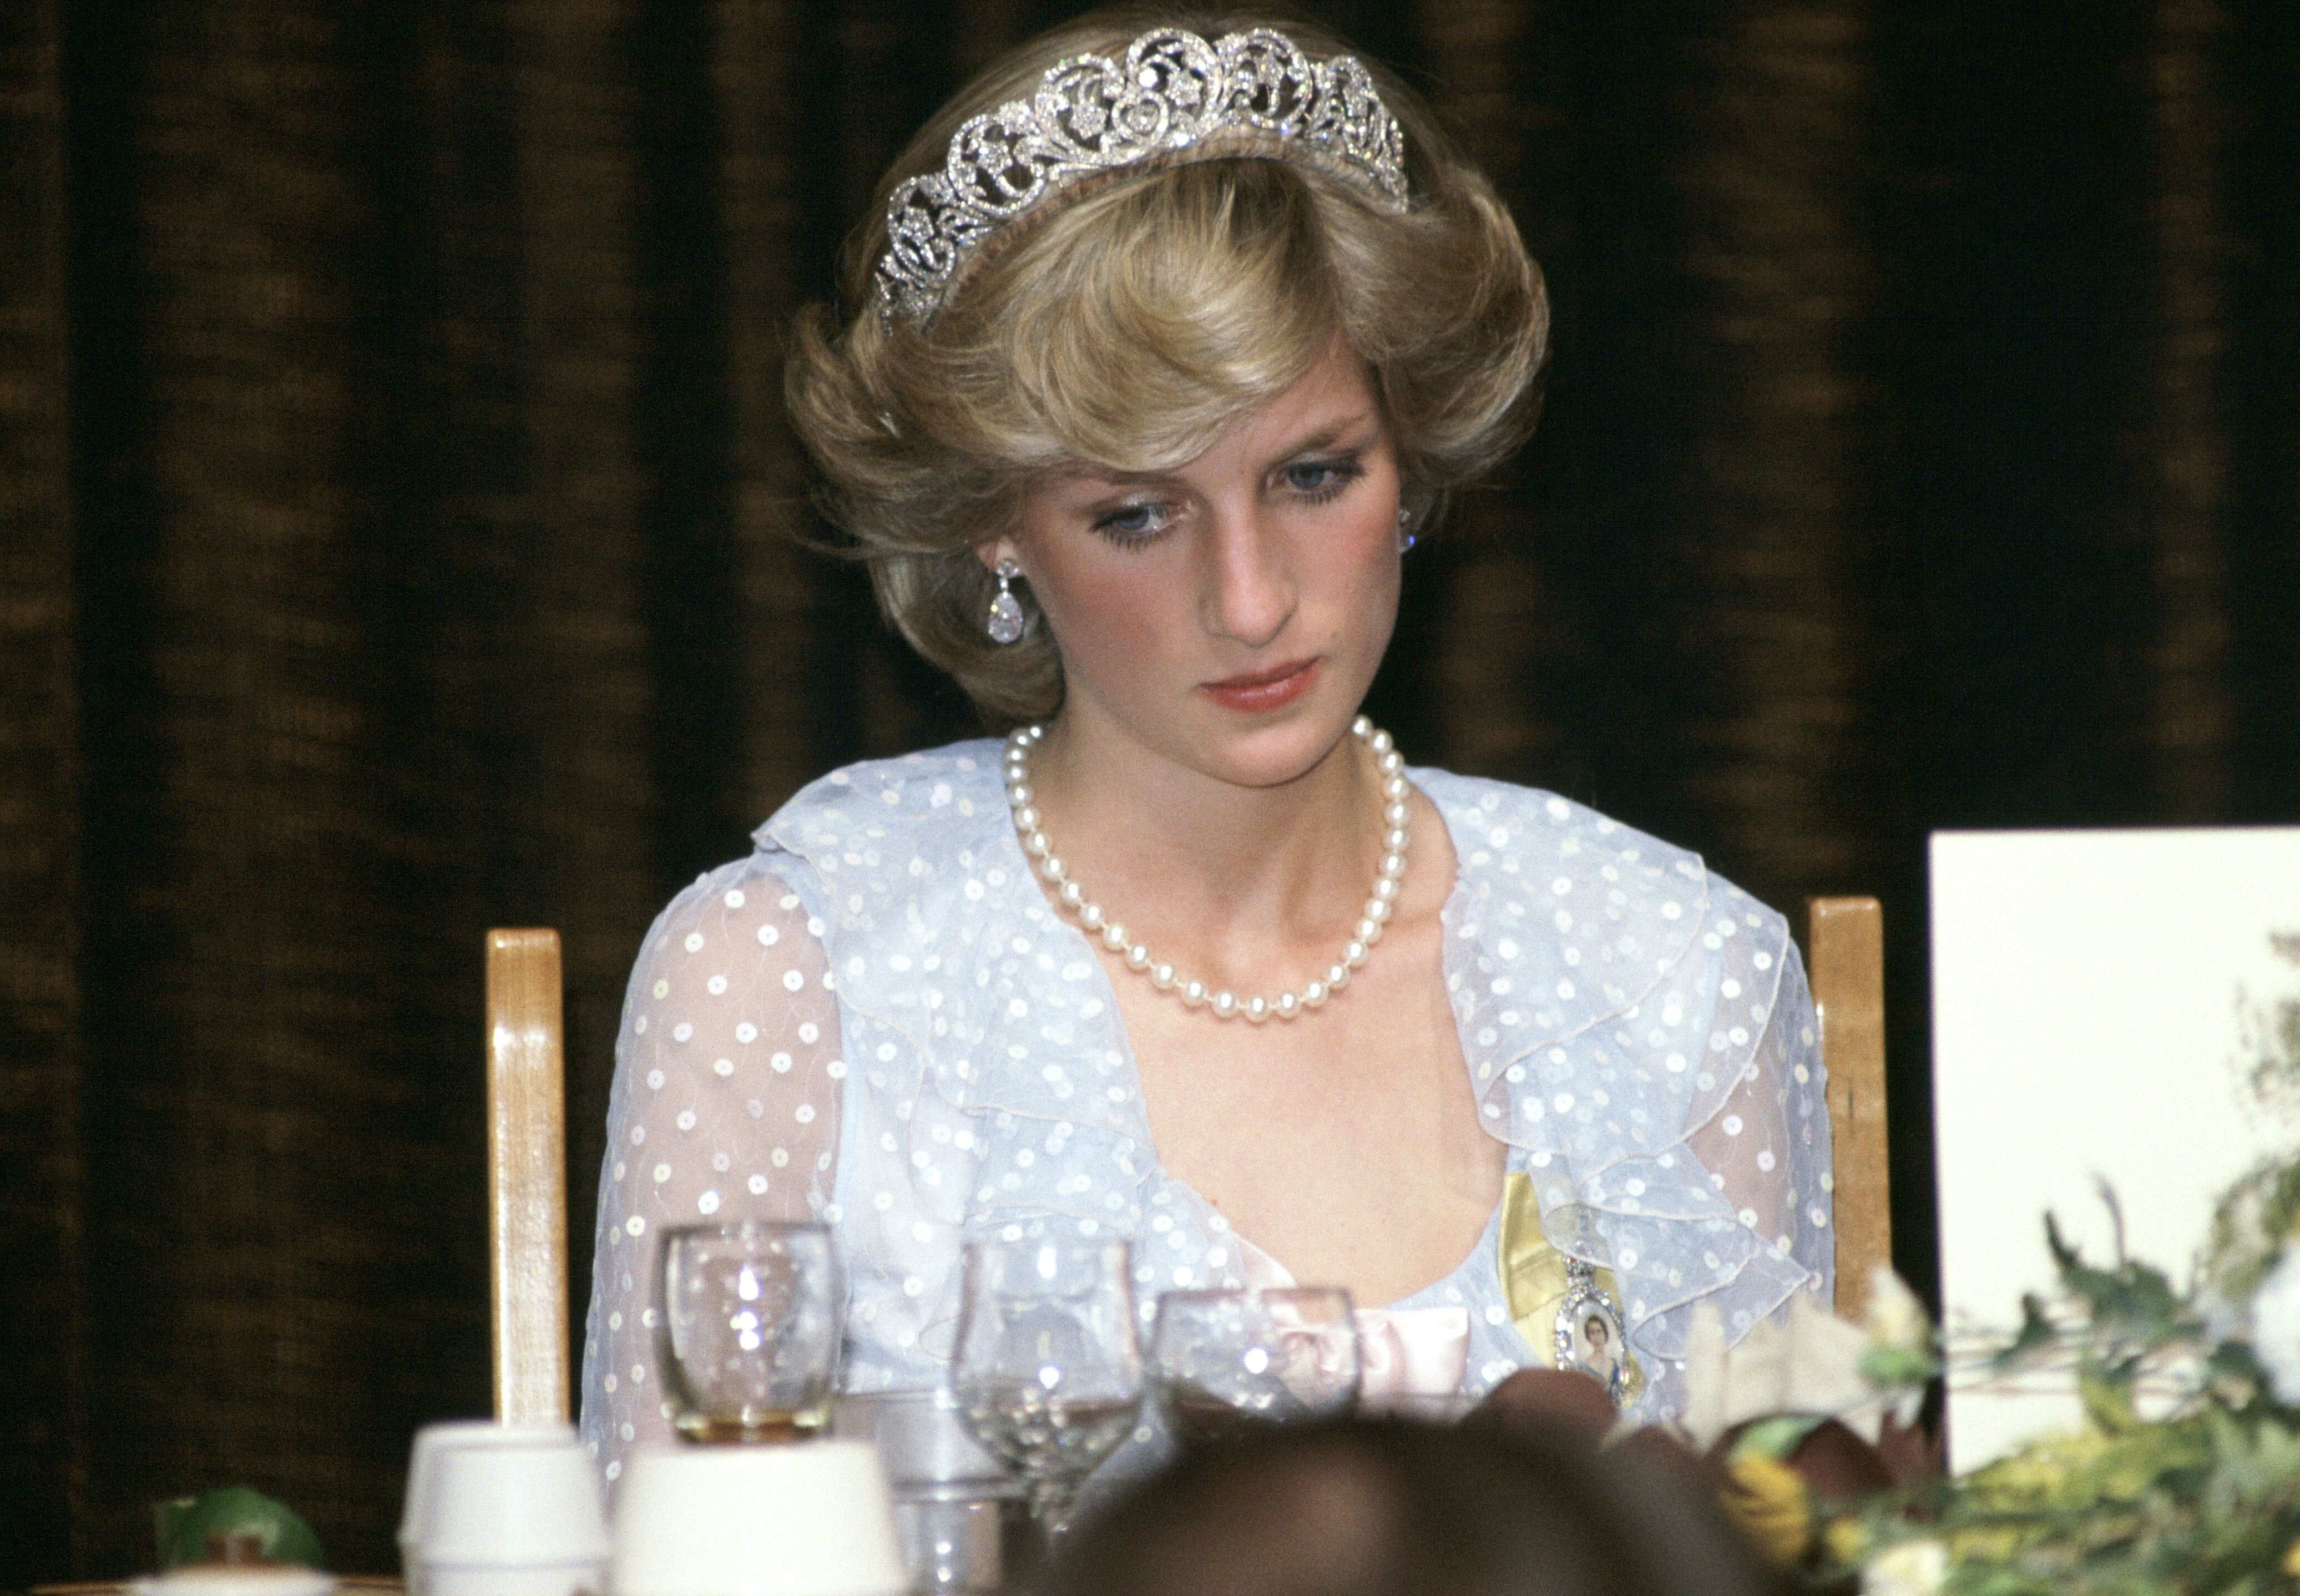 Princess Diana at a banquet in New Zealand wearing a blue chiffon evening dress on April 20, 1983 Photo Tim Graham | Photo: Library/ Getty Images